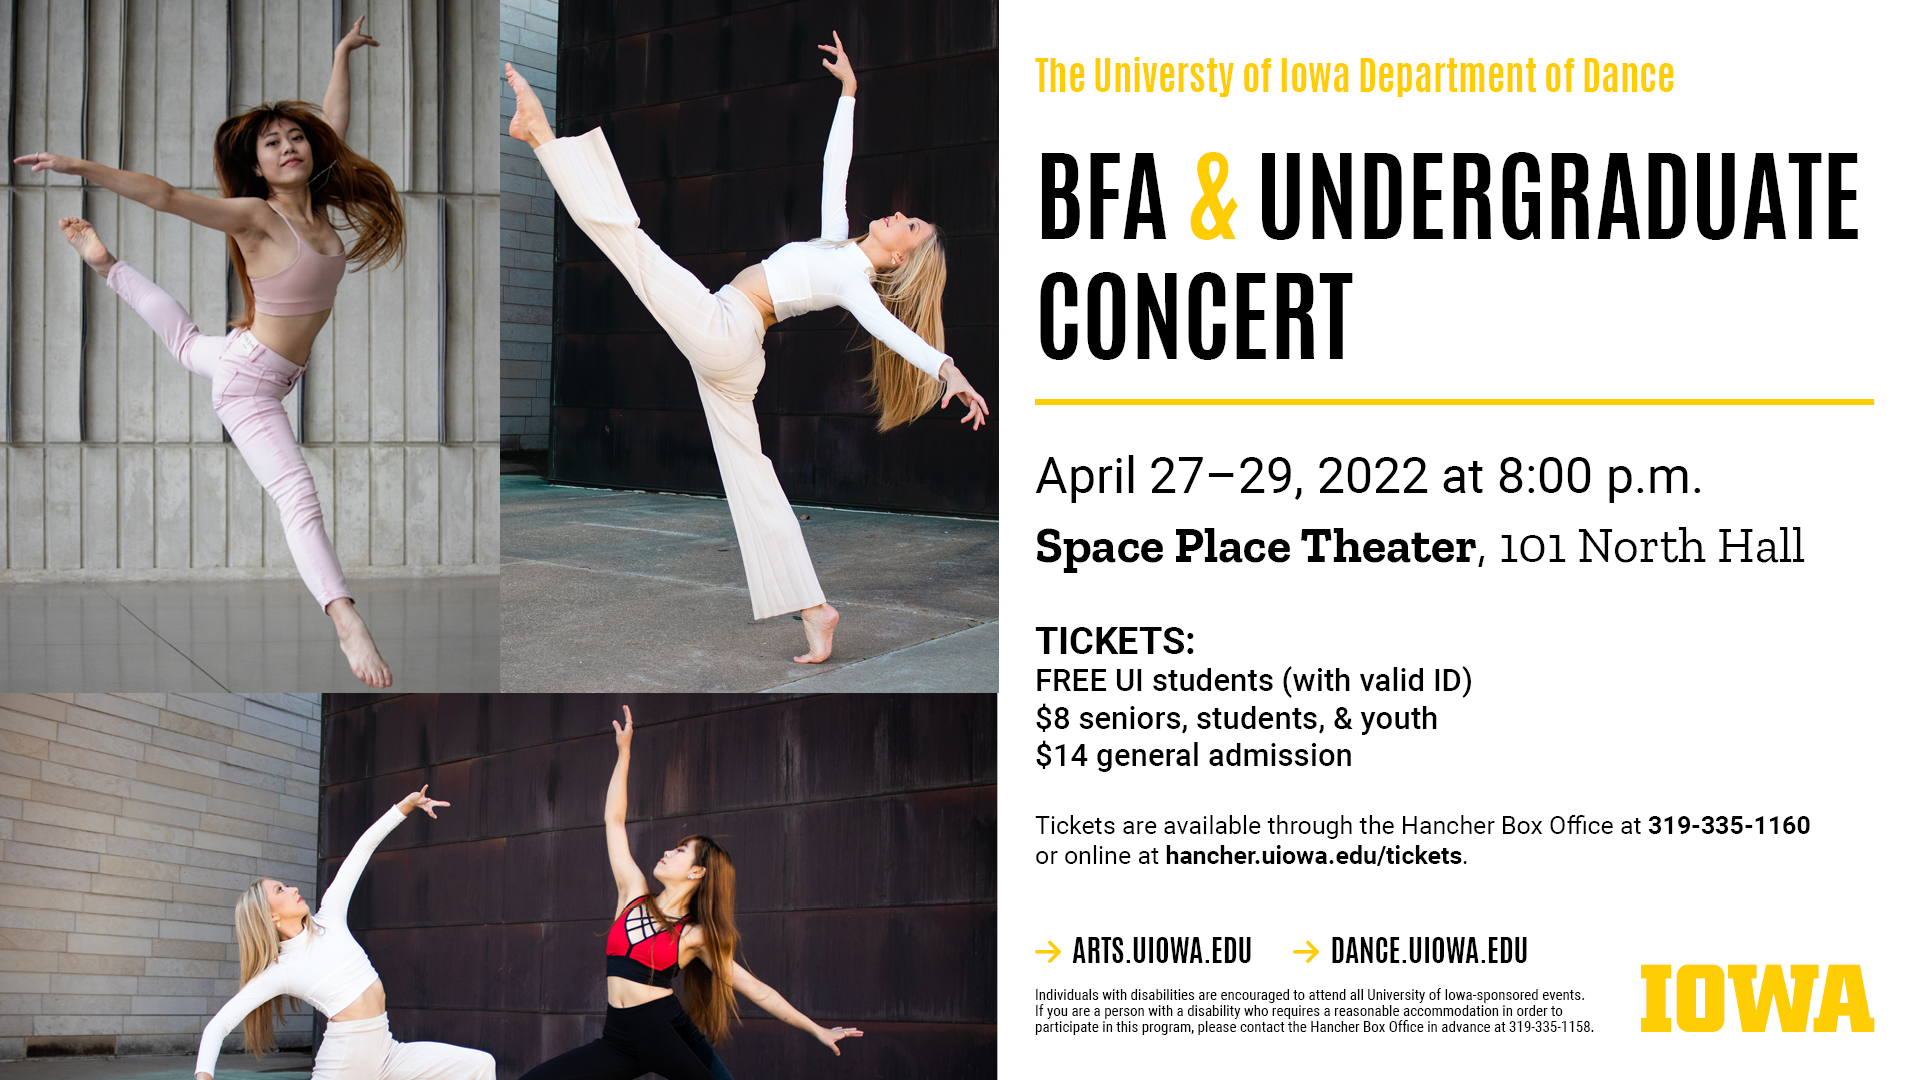 The University of Iowa Department of Dance BFA & Undergraduate Concert. April 27-29 at 8:00pm in the Space Place Theater, 101 North Hall. Tickets are free to UI students with a valid ID, $8 for seniors students, and youth and $14 general admission